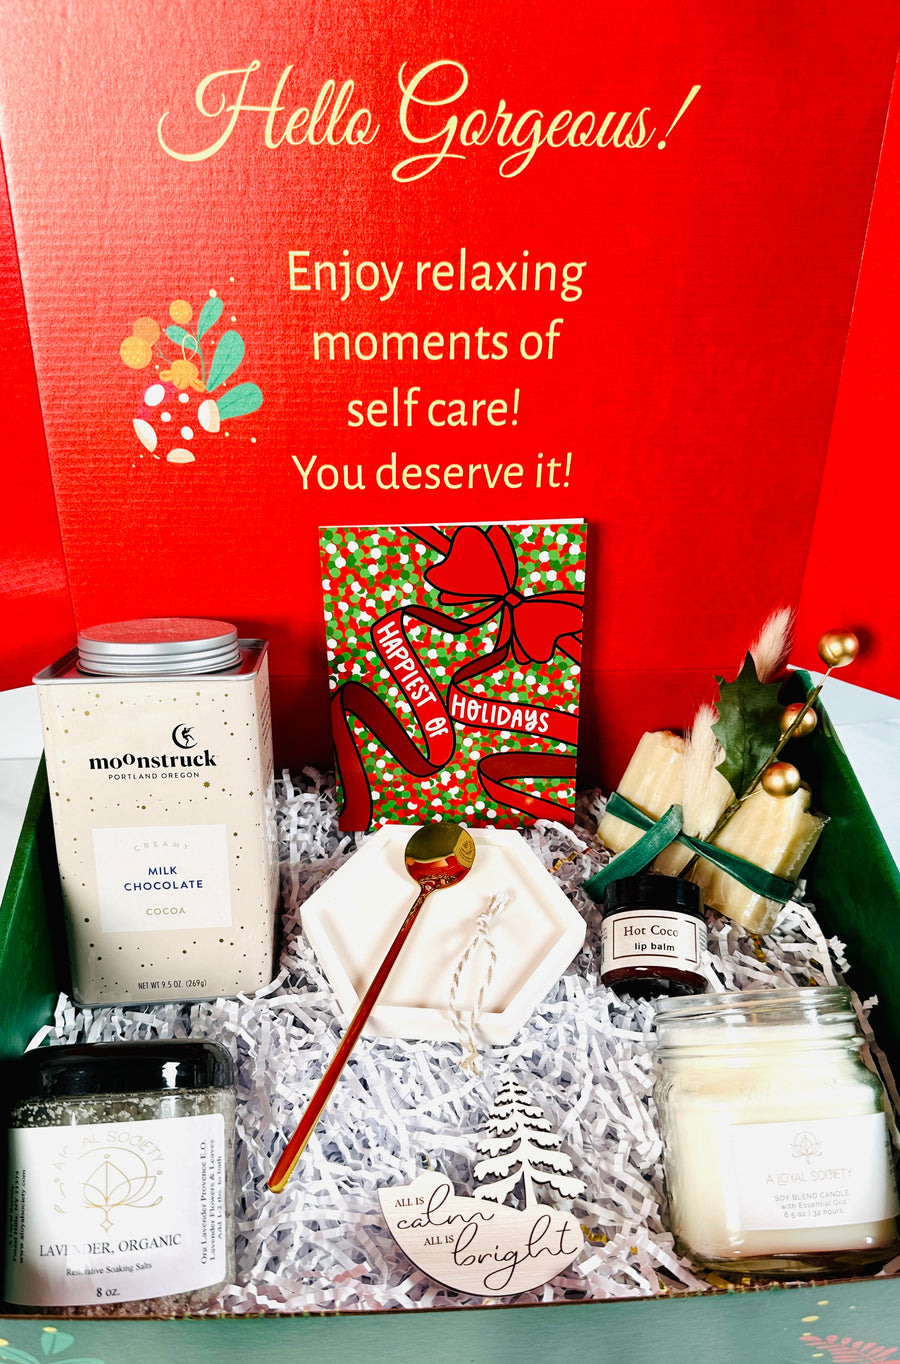 All is Calm Christmas Spa Gift Box with Hot Cocoa & Spoon